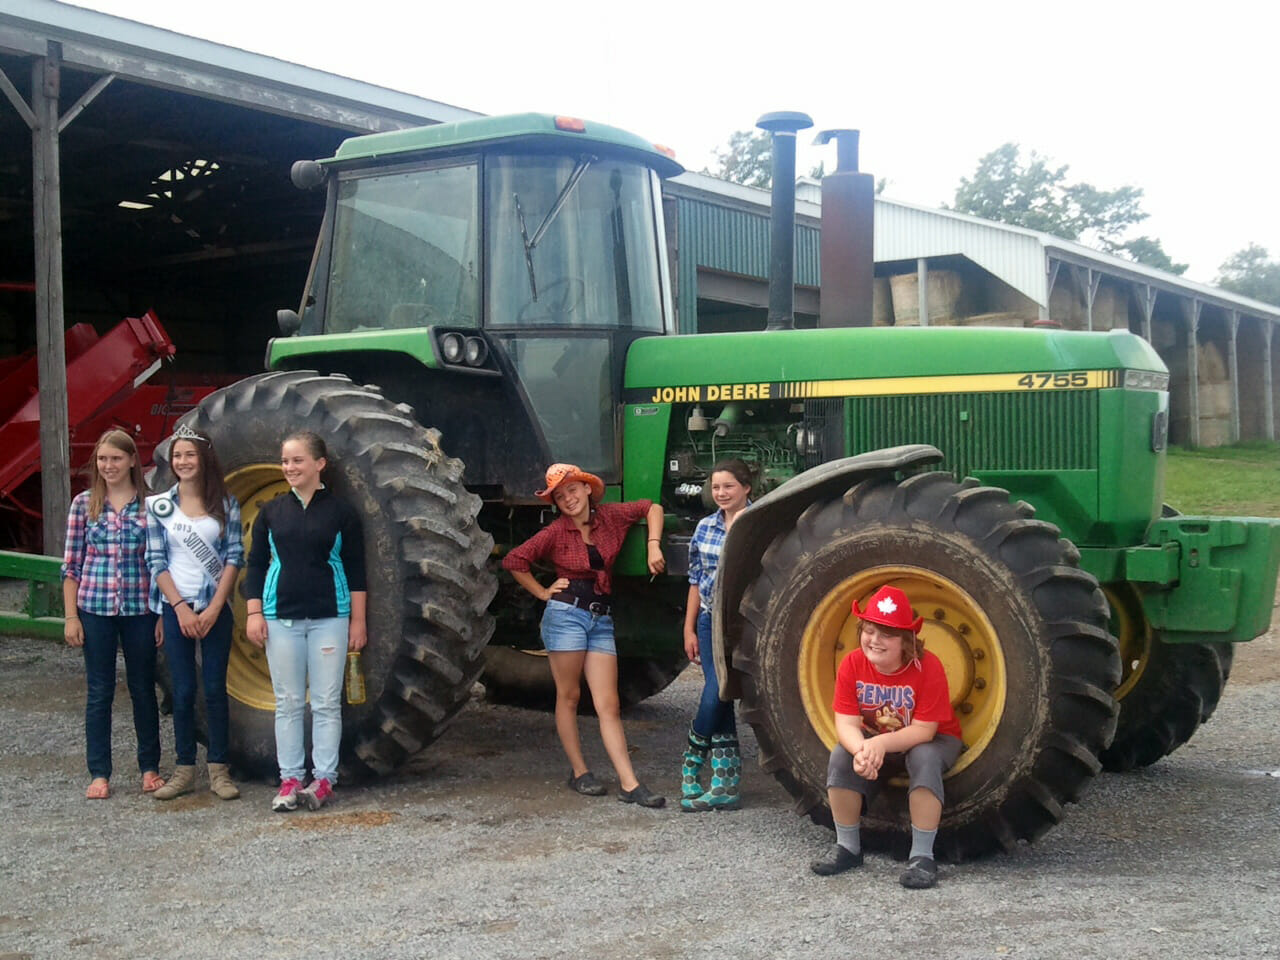 Year Of The Tactor - L-R-Junior Ambassador participant- Deanna Pegg, 2013 Junior Ambassador Emma McDonald, Junior Ambassador participants Maddy Grossi, Hailey Barns, Emily Cryderman and Grant Williams celebrating year of the tractor.